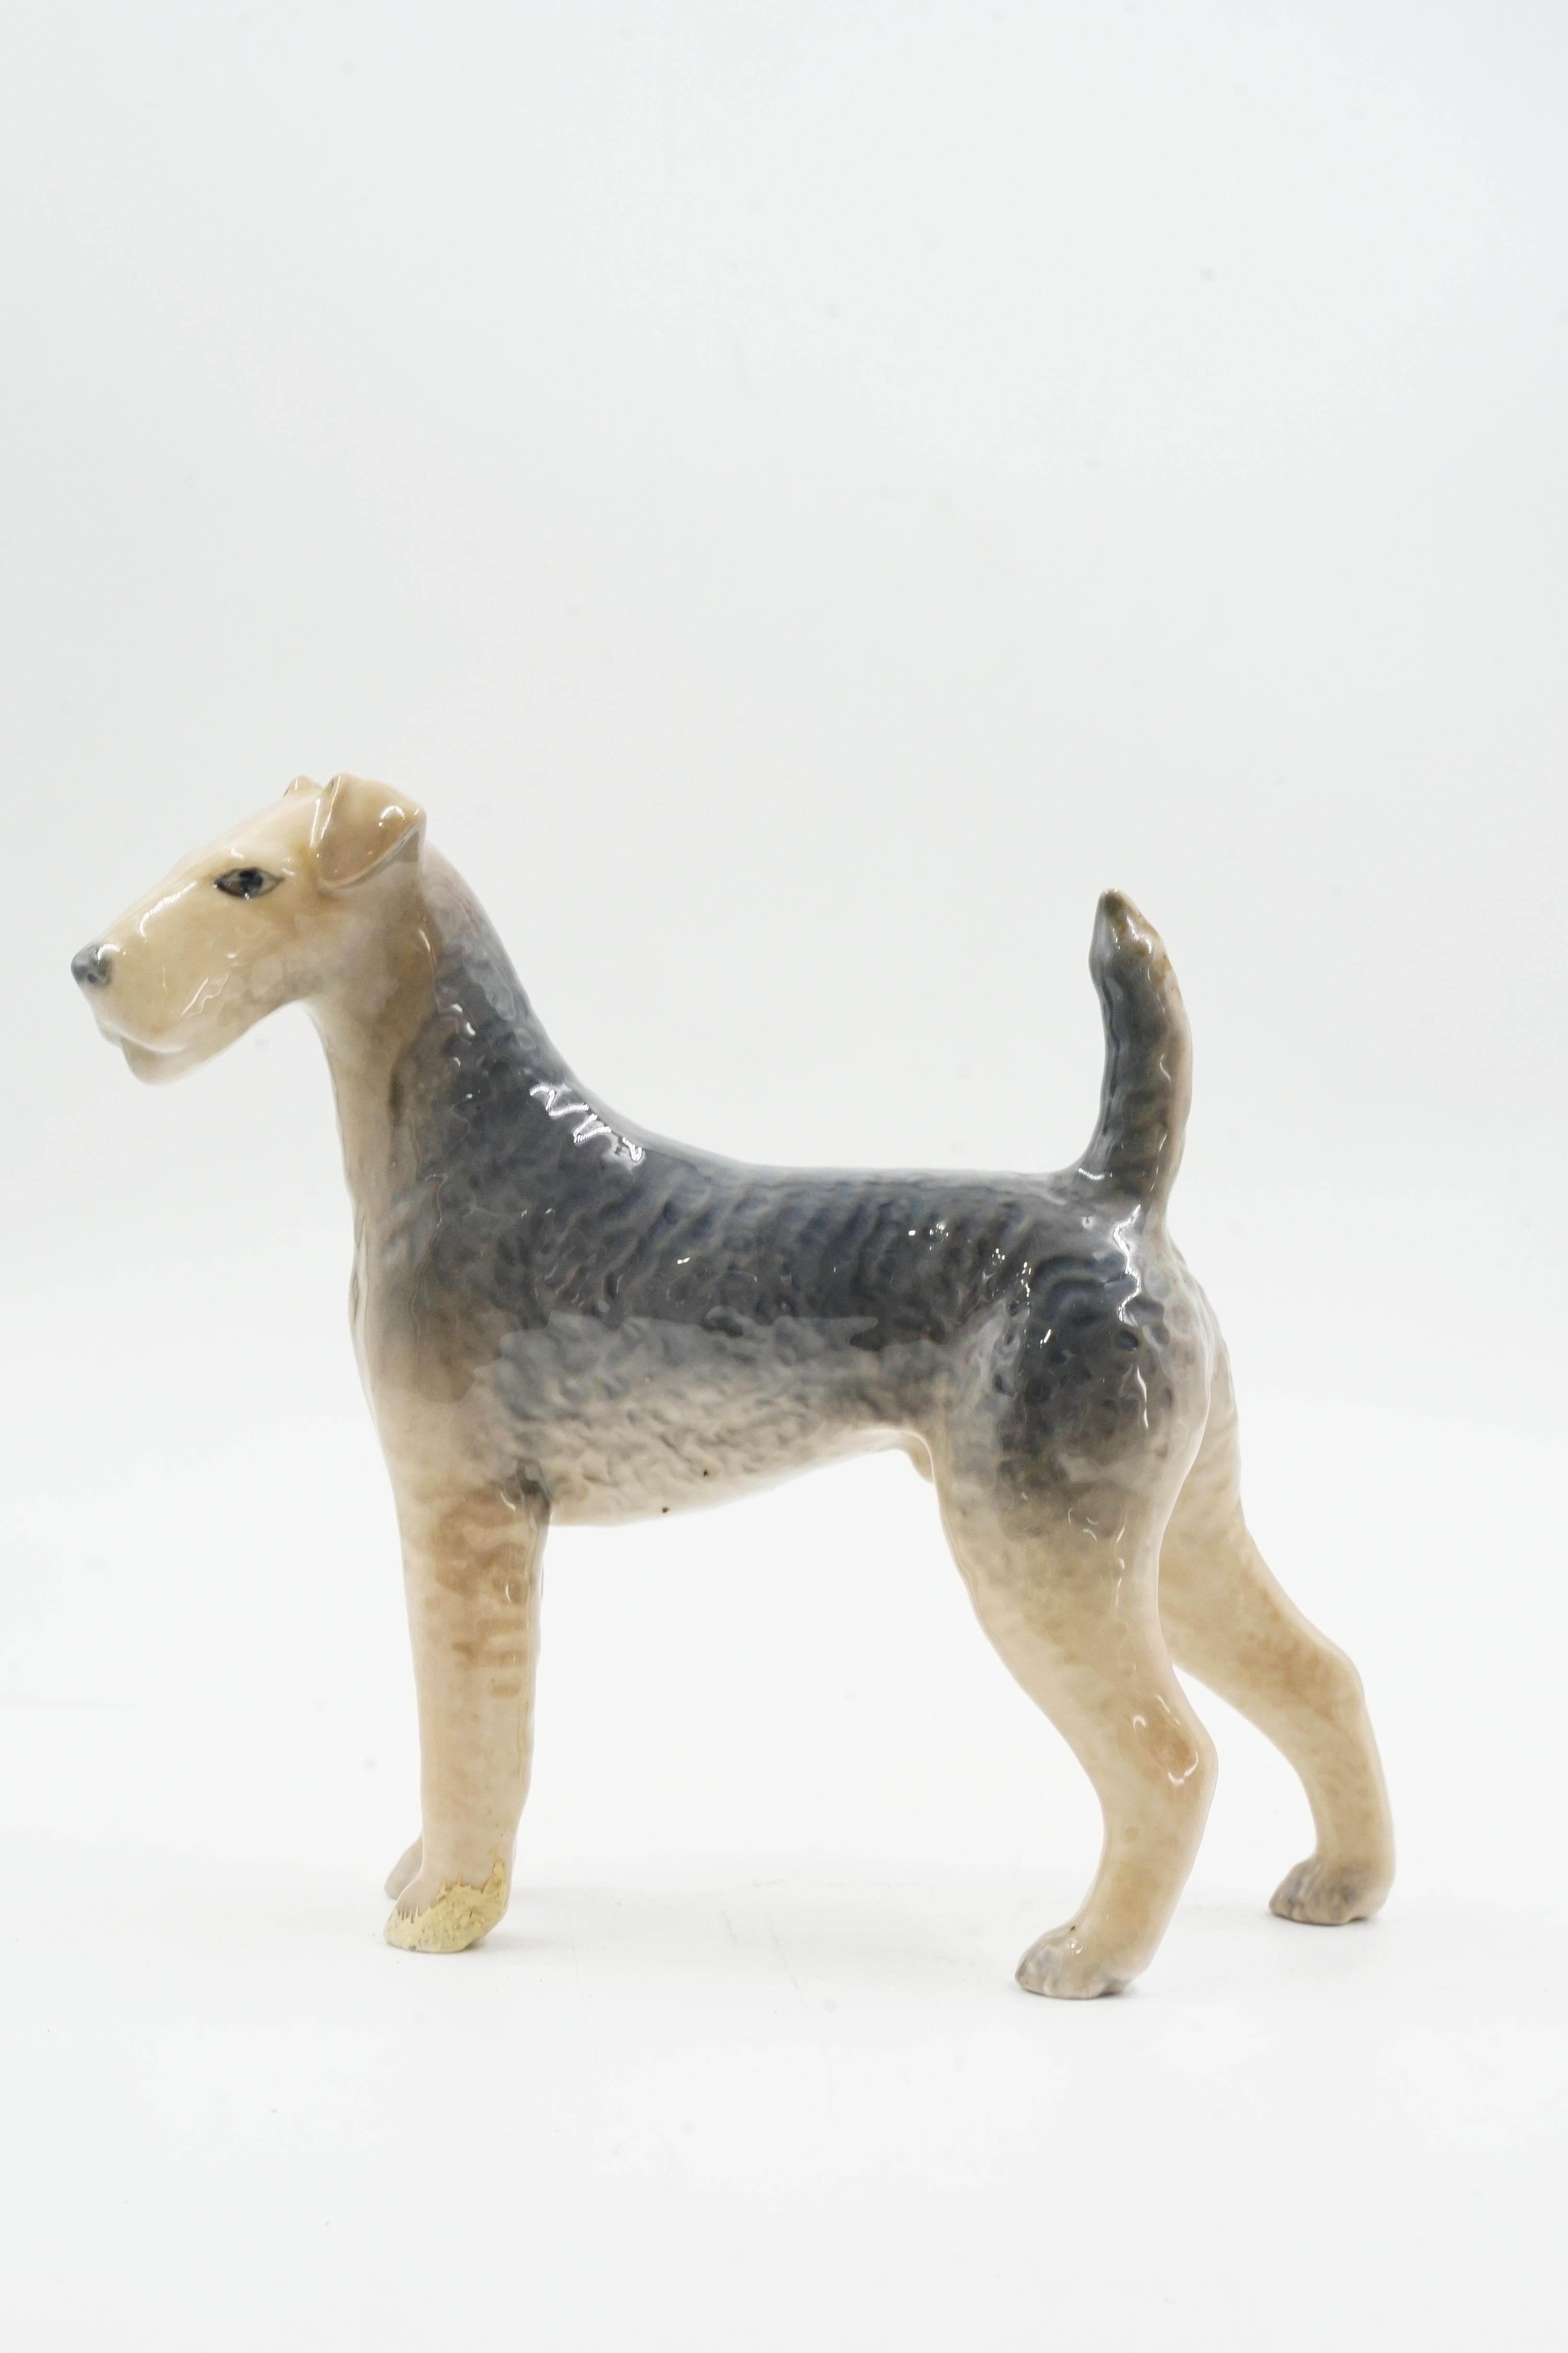 Royal Copenhagen dog ceramic sculpture
Origin Denmark Circa 1960
excellent general condition with some wear on one of its front legs
Dog sculpture possibly of the Airedale Terrier breed
glazed porcelain
al Copenhagen, officially Royal Porcelain